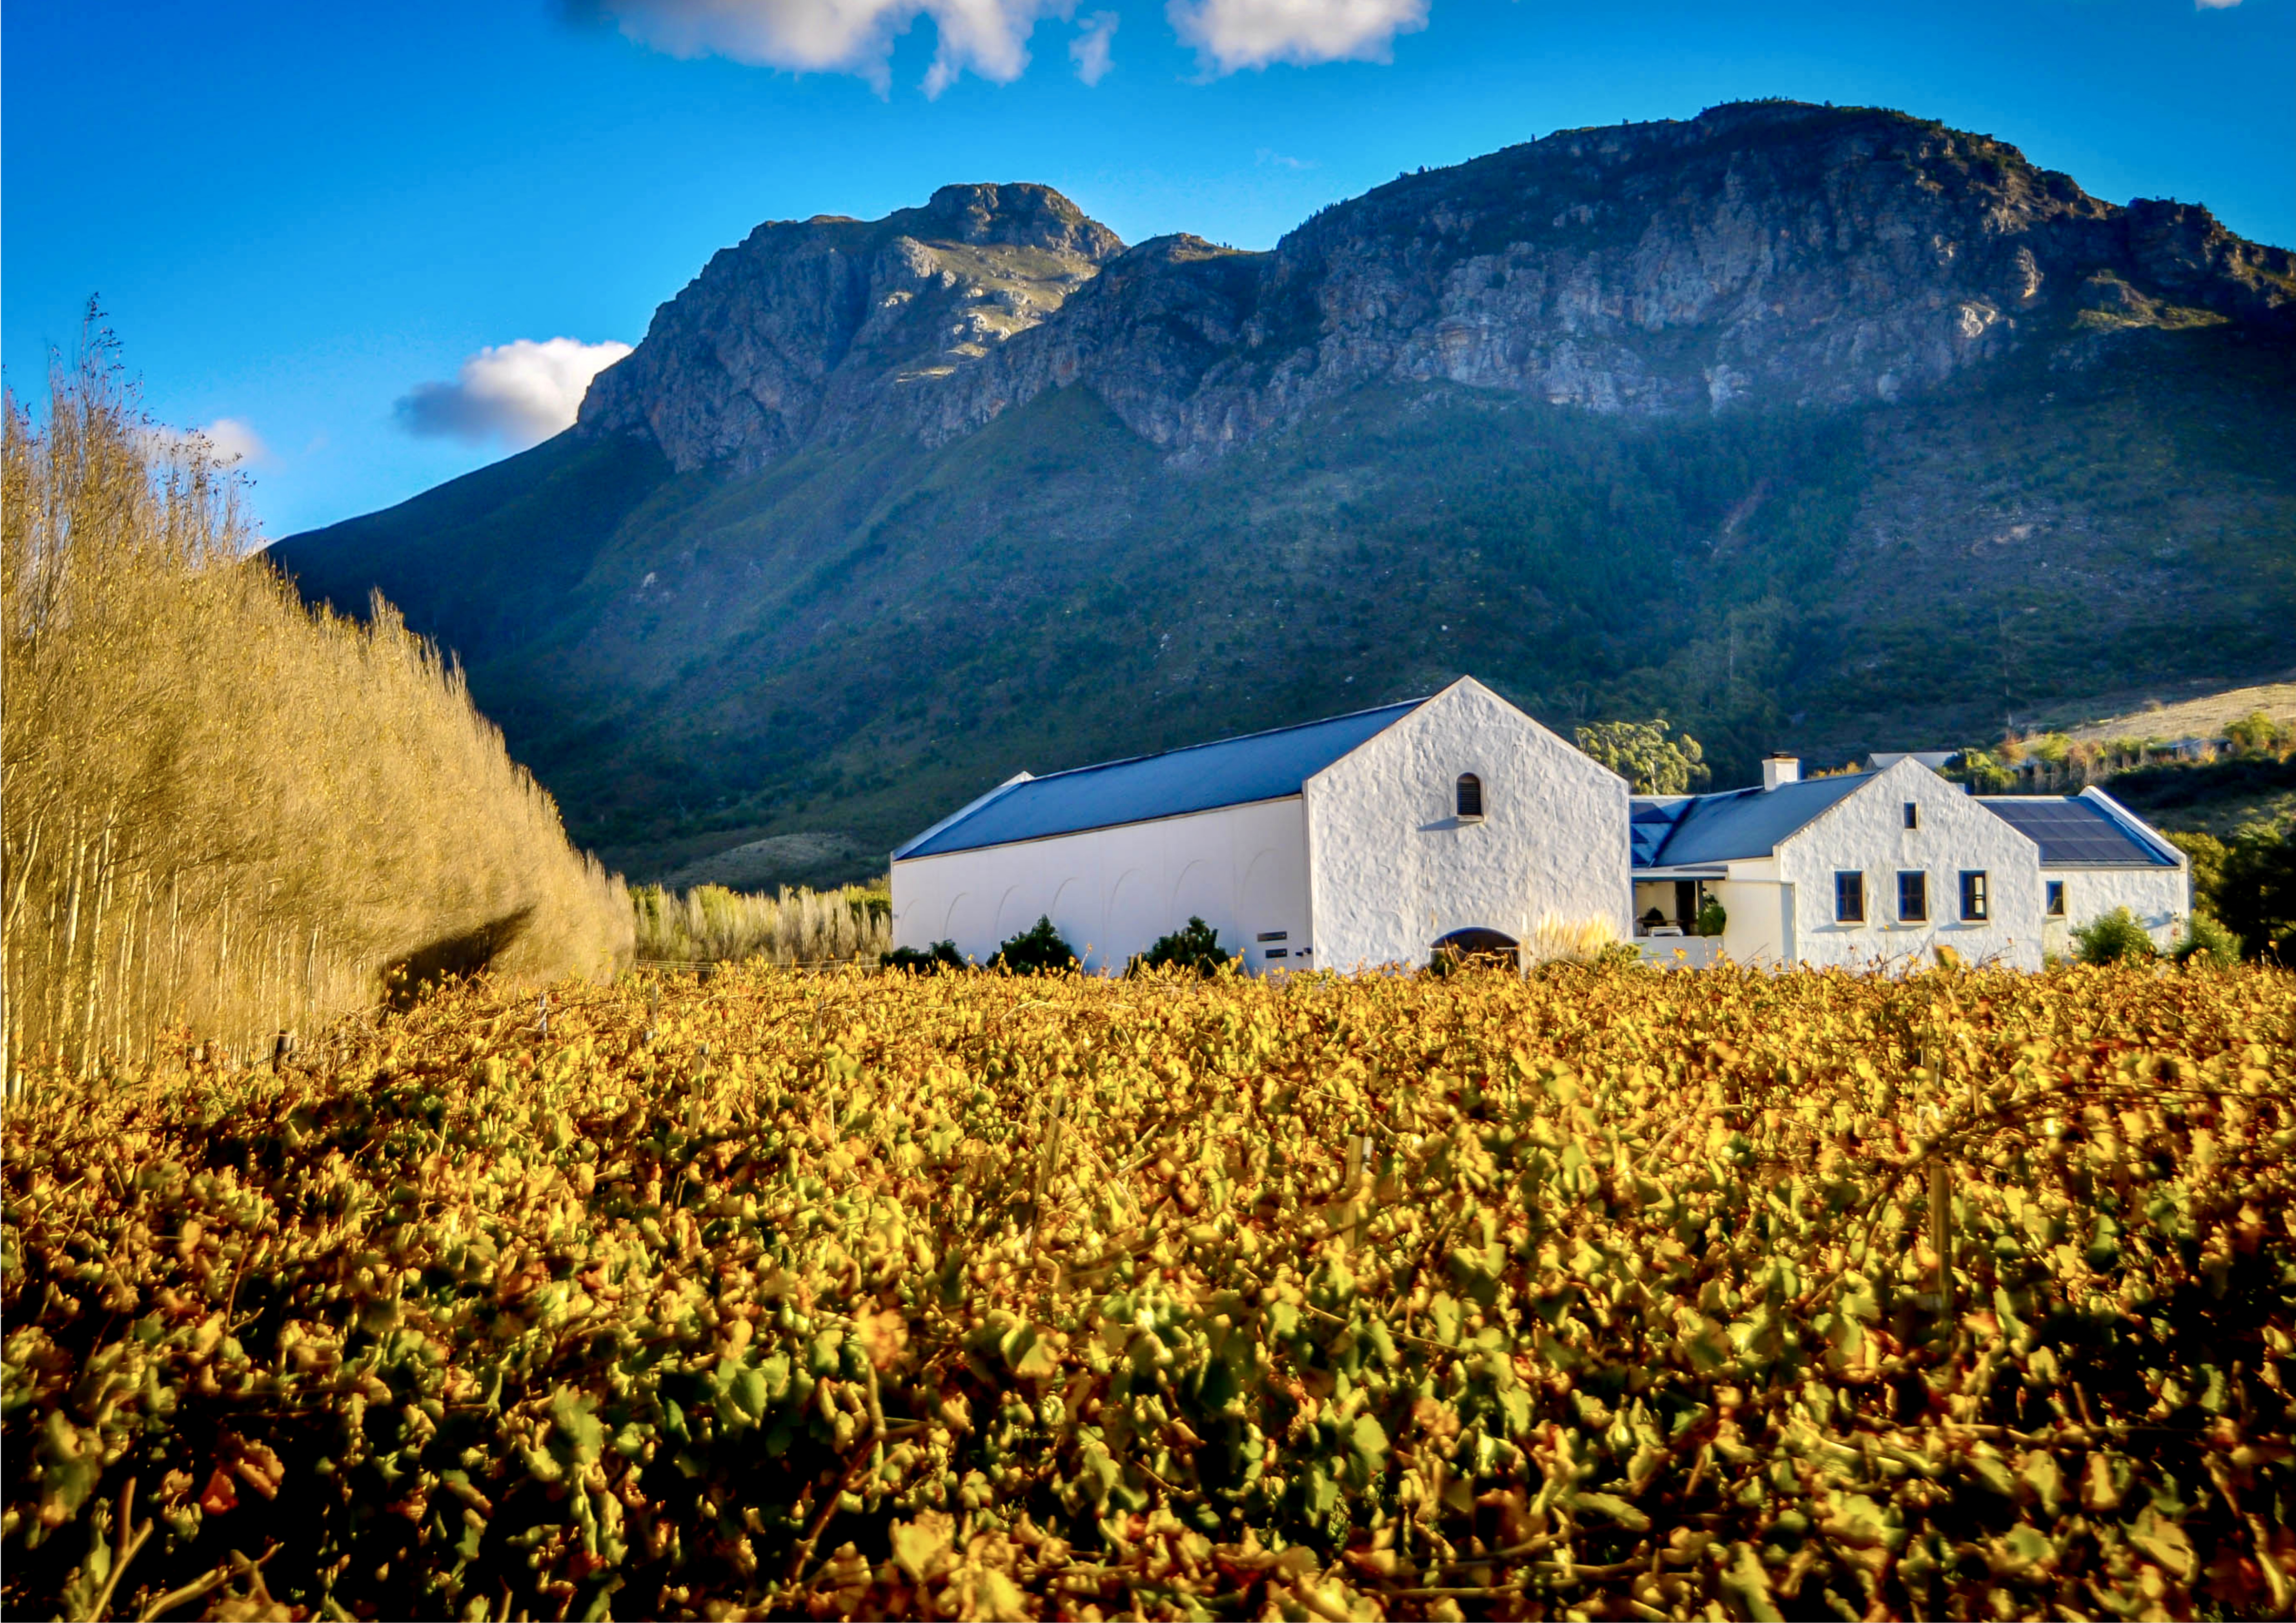 franschhoek-homes-Cape-winelands-accomodation-tour-operator-cape-town-into-tours-groot-constantia-city-sightseeing-constantia-valley-paarl-wine-pairing-franschhoek-western-cape-franschhoek-wine-farms-wine-estates-cape-town-wine-south-africa-stellenbosch-wine-route
Vineyards-mountains-jonkershoek-simonsig-dorp-street-university-cape-town-wine-tasting-western-cape-winelands-house-wine-farms-wine-estate-resturant-stellenbosch-accomodation-into-tours-cape-town-wine-tasting-day-tours-private-tours-cape-town-tour-guide
